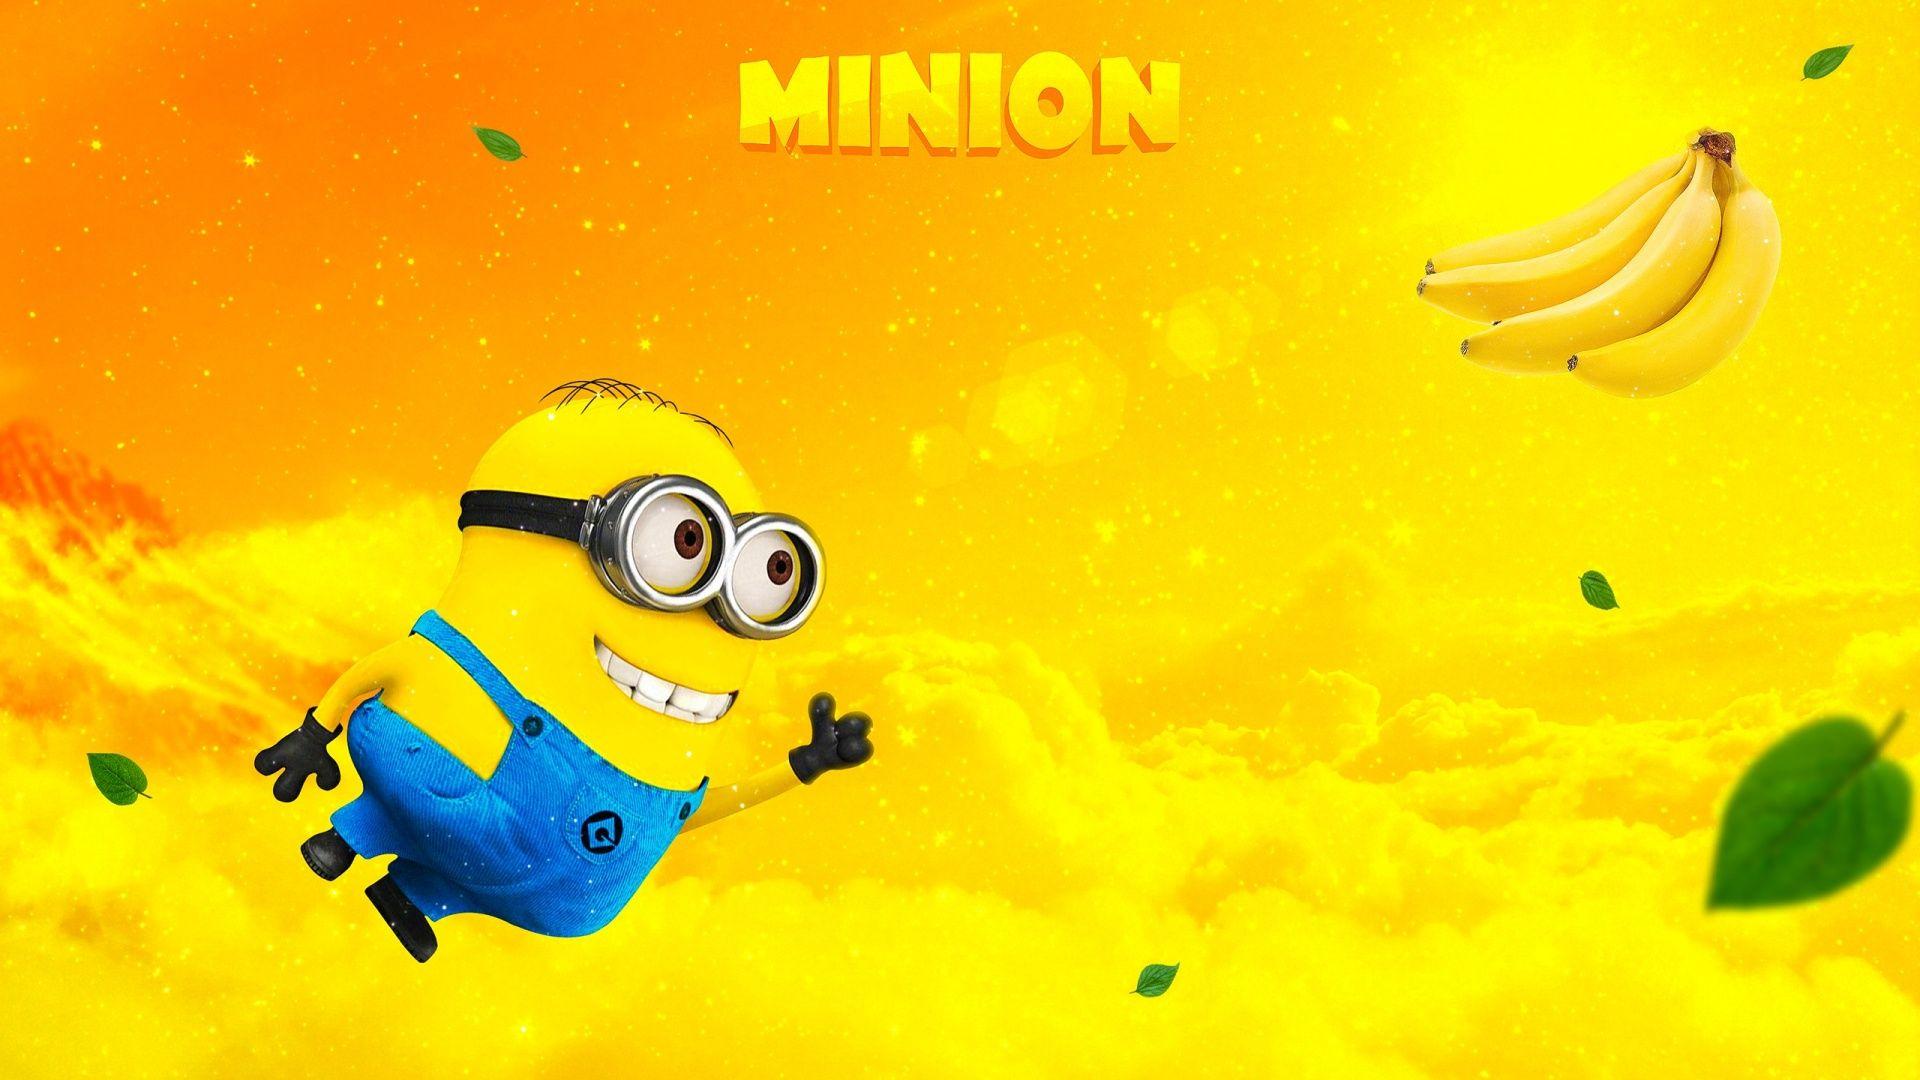 Minion Banana Wallpaper in jpg format for free download